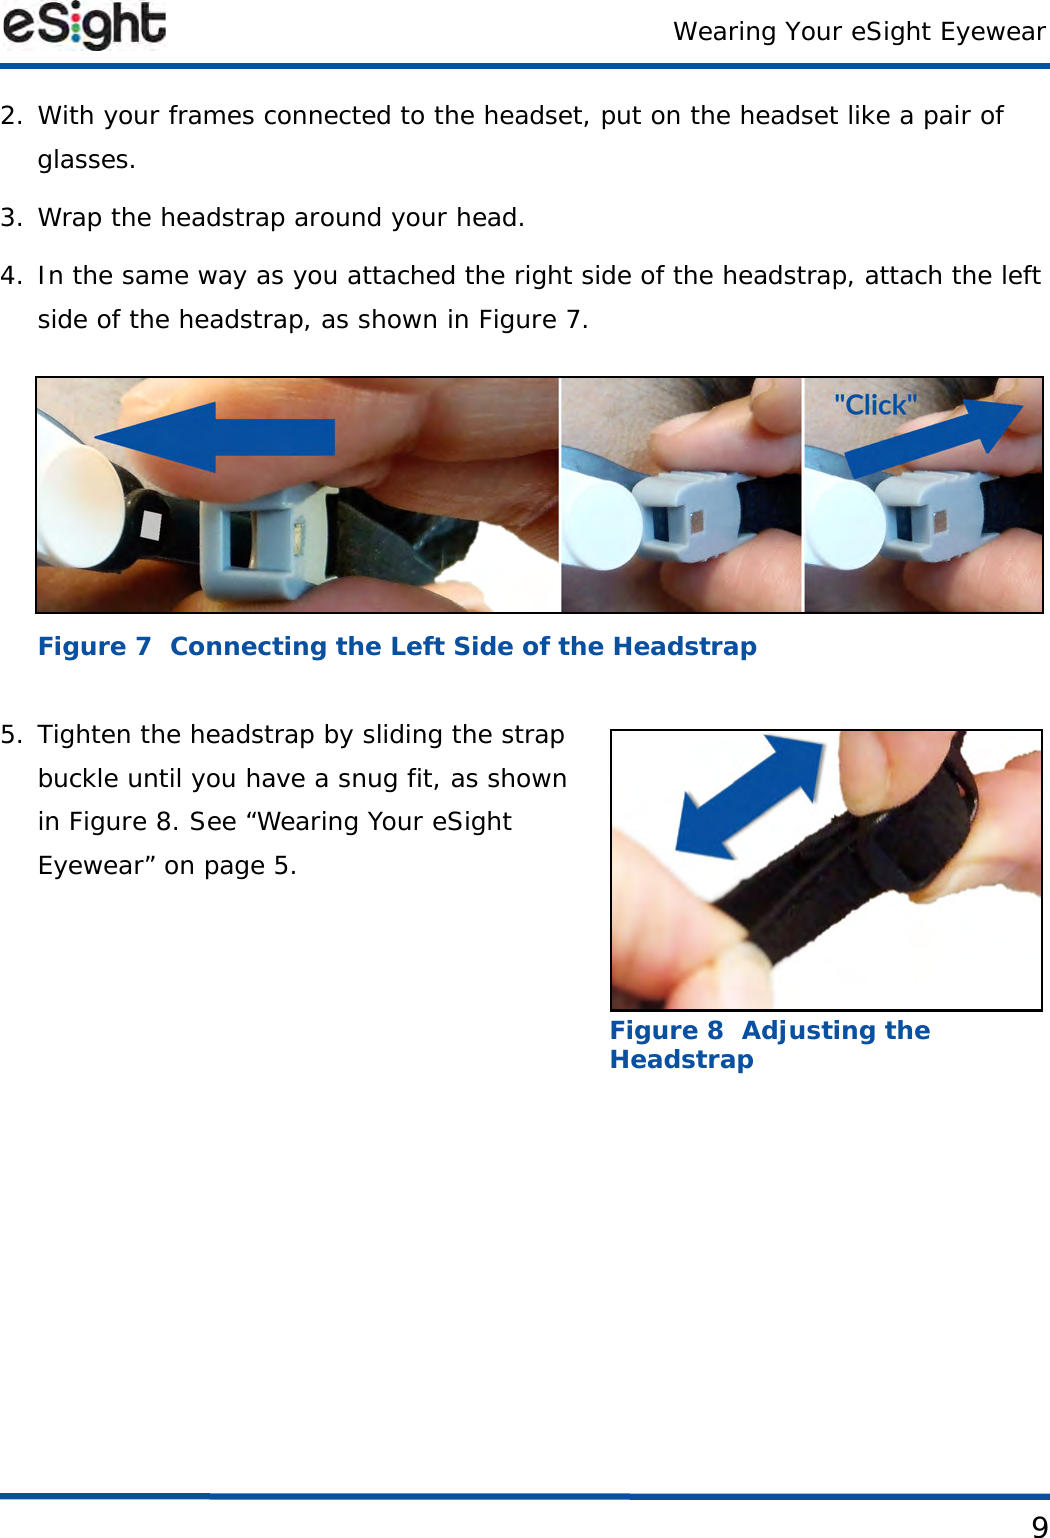 Wearing Your eSight Eyewear92. With your frames connected to the headset, put on the headset like a pair of glasses.3. Wrap the headstrap around your head.4. In the same way as you attached the right side of the headstrap, attach the left side of the headstrap, as shown in Figure 7. Figure 7  Connecting the Left Side of the Headstrap5. Tighten the headstrap by sliding the strap buckle until you have a snug fit, as shown in Figure 8. See “Wearing Your eSight Eyewear” on page 5.Figure 8  Adjusting the Headstrap